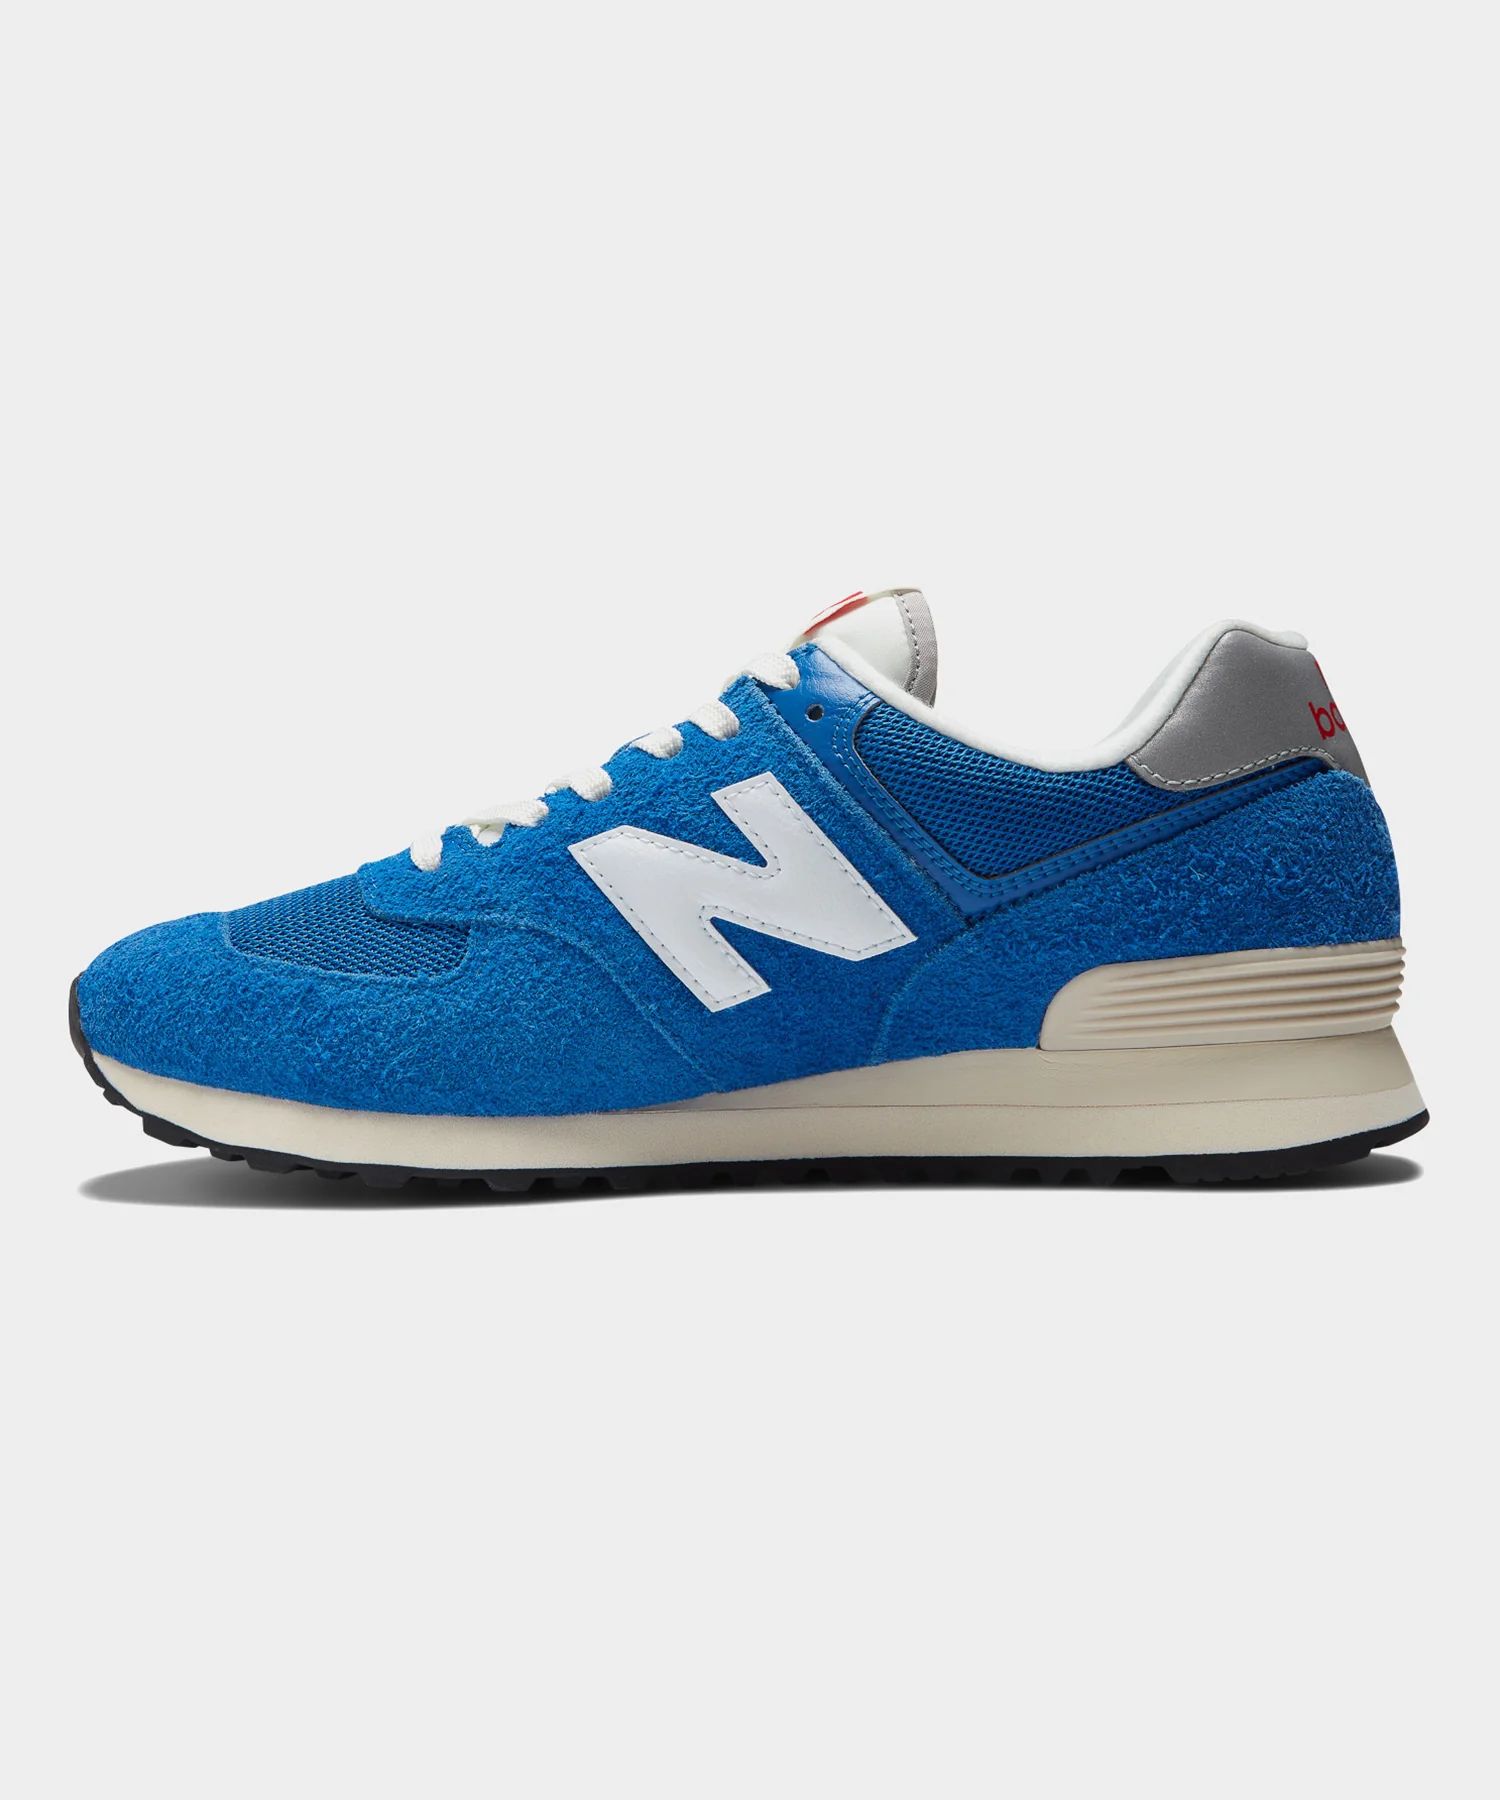 New Balance 574 Blue with White | Todd Snyder